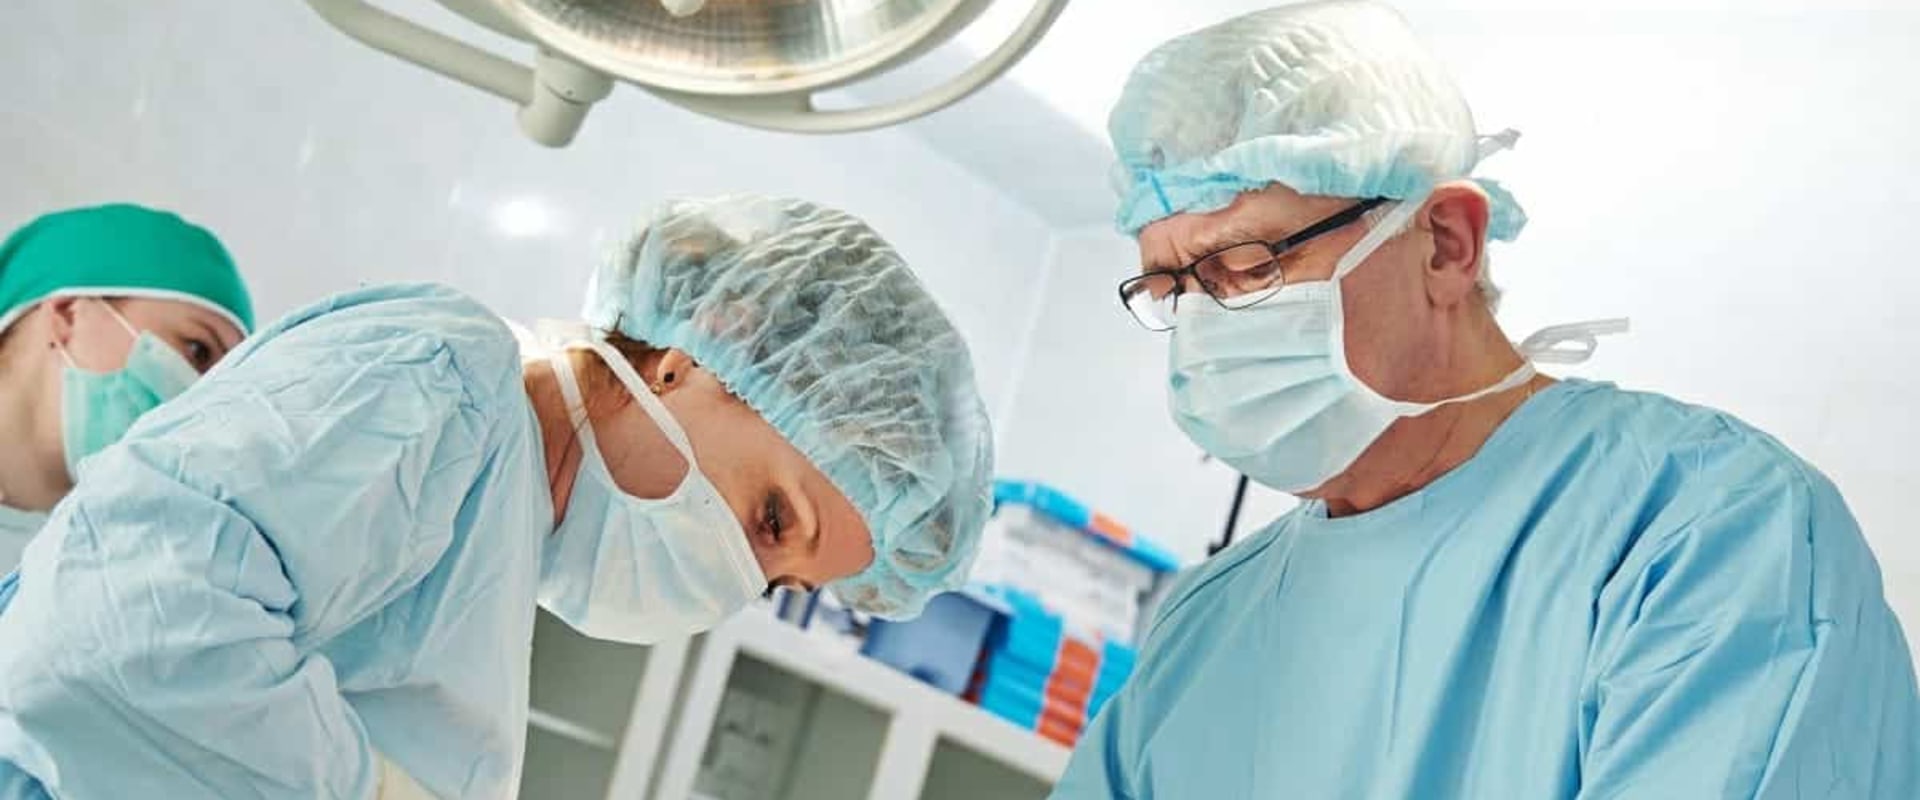 Are Cosmetic Surgery Procedures Safe?